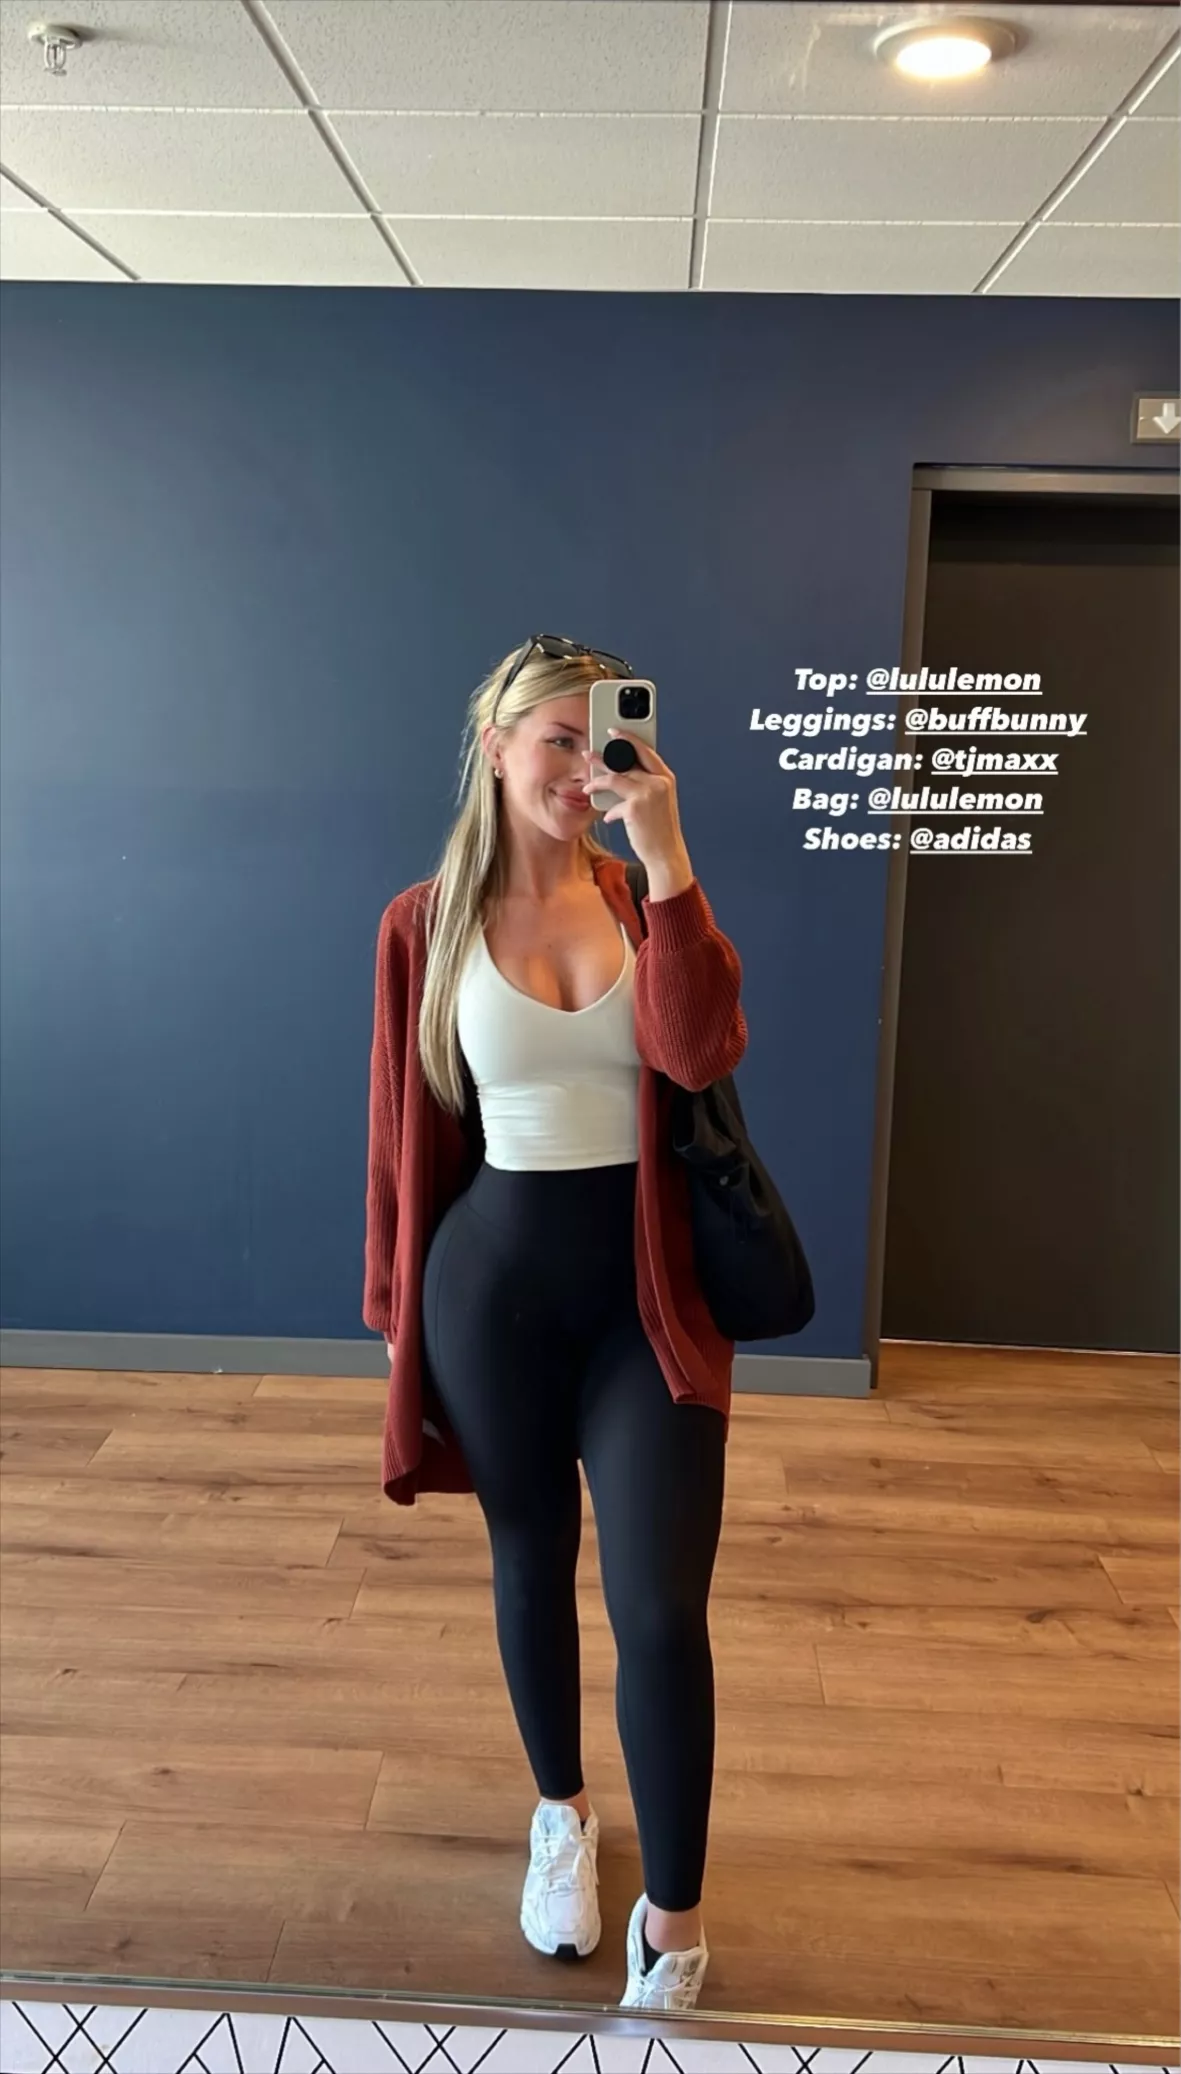 Are Buffbunny Legacy Leggings worth the hype?